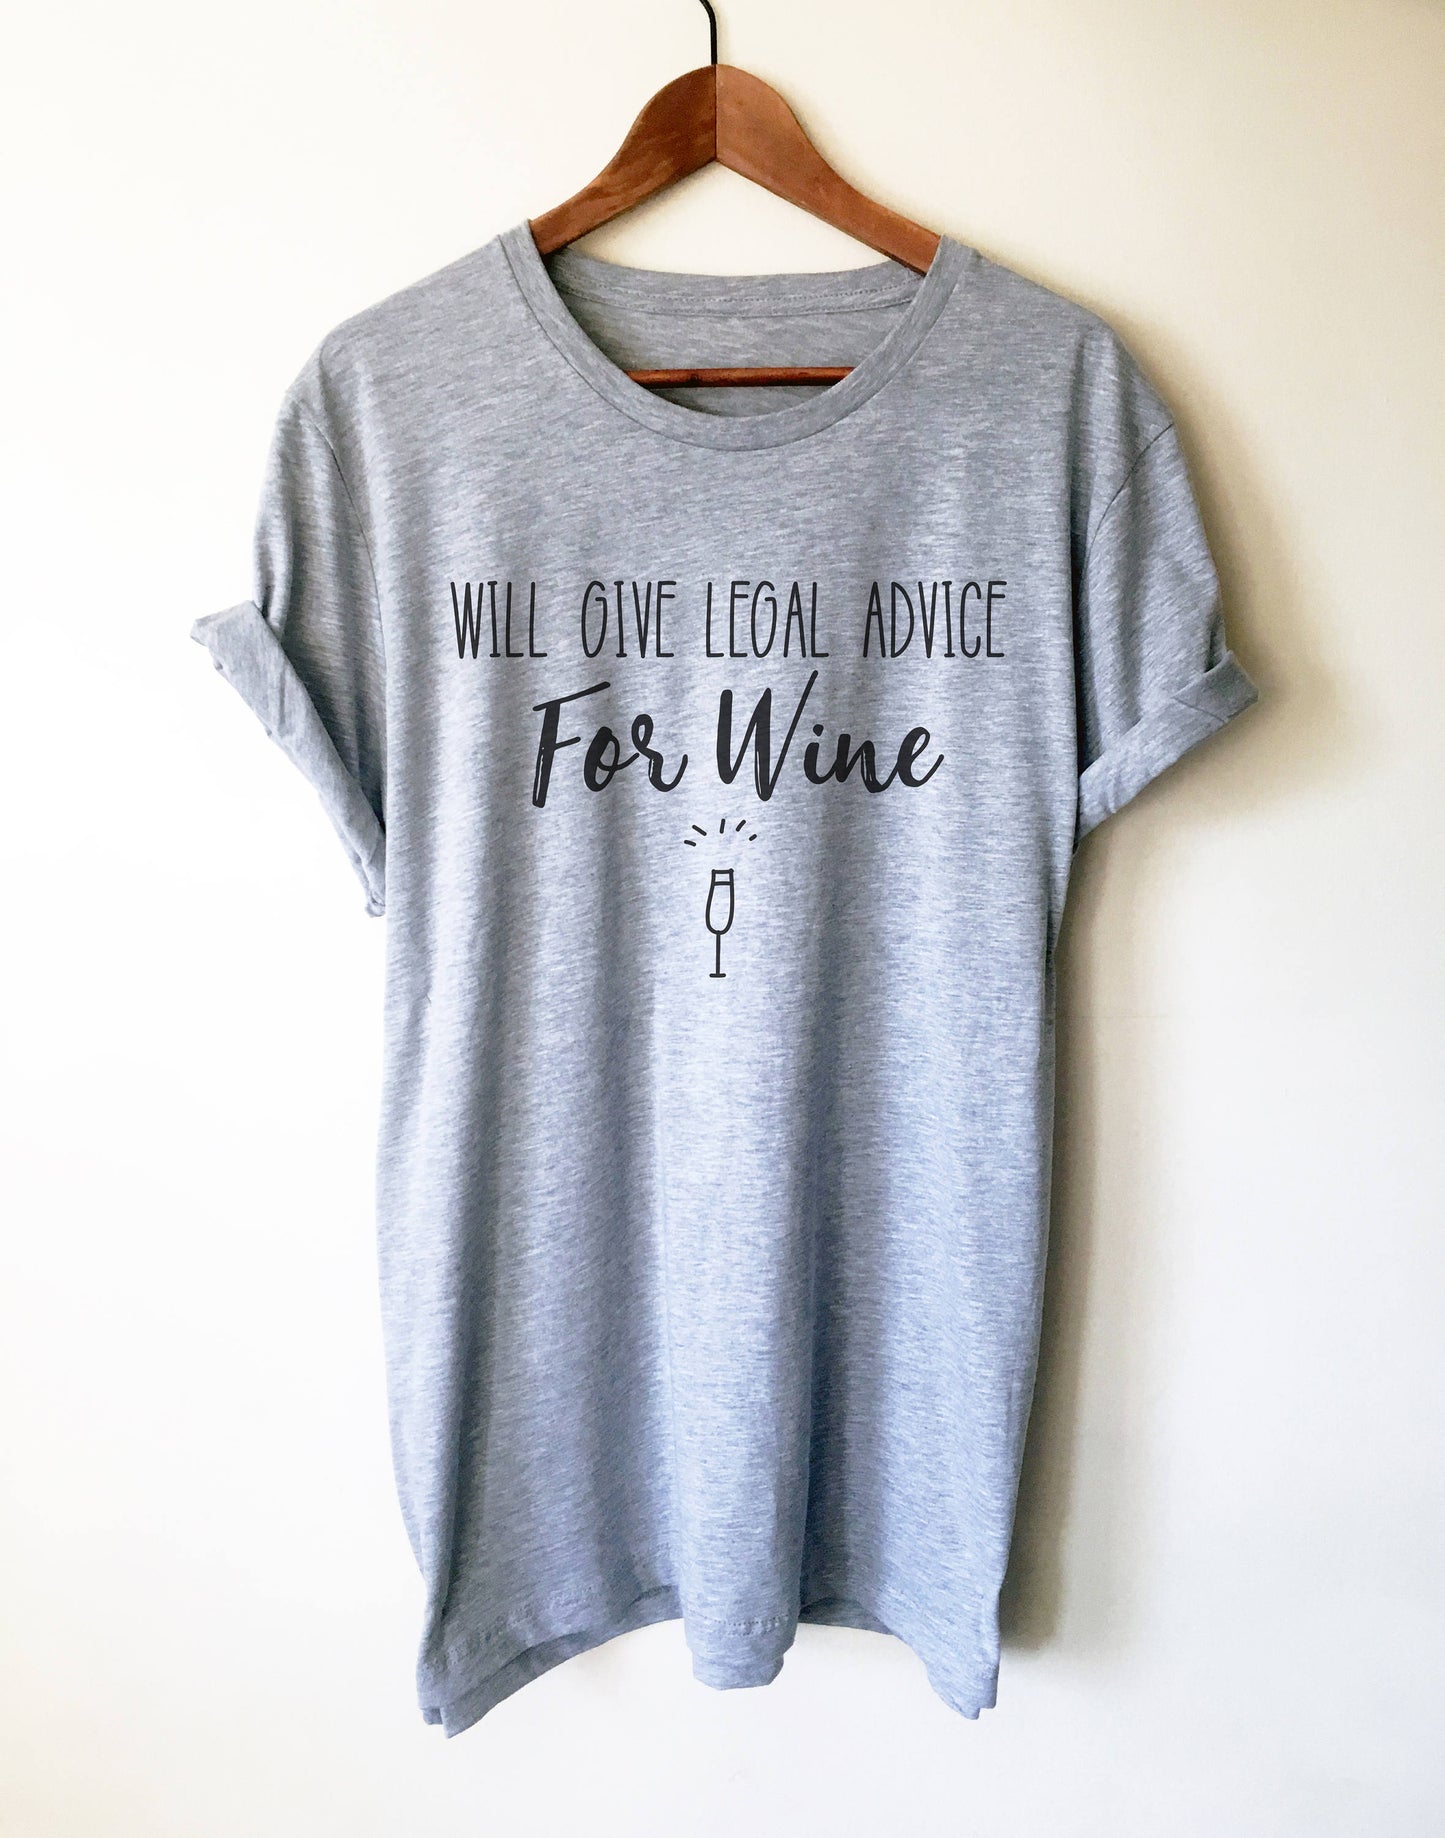 Will Give Legal Advice For Wine Unisex Shirt - Lawyer Shirt, Lawyer Gift, Law School, College Student Gift, Law Student, Graduation Gift